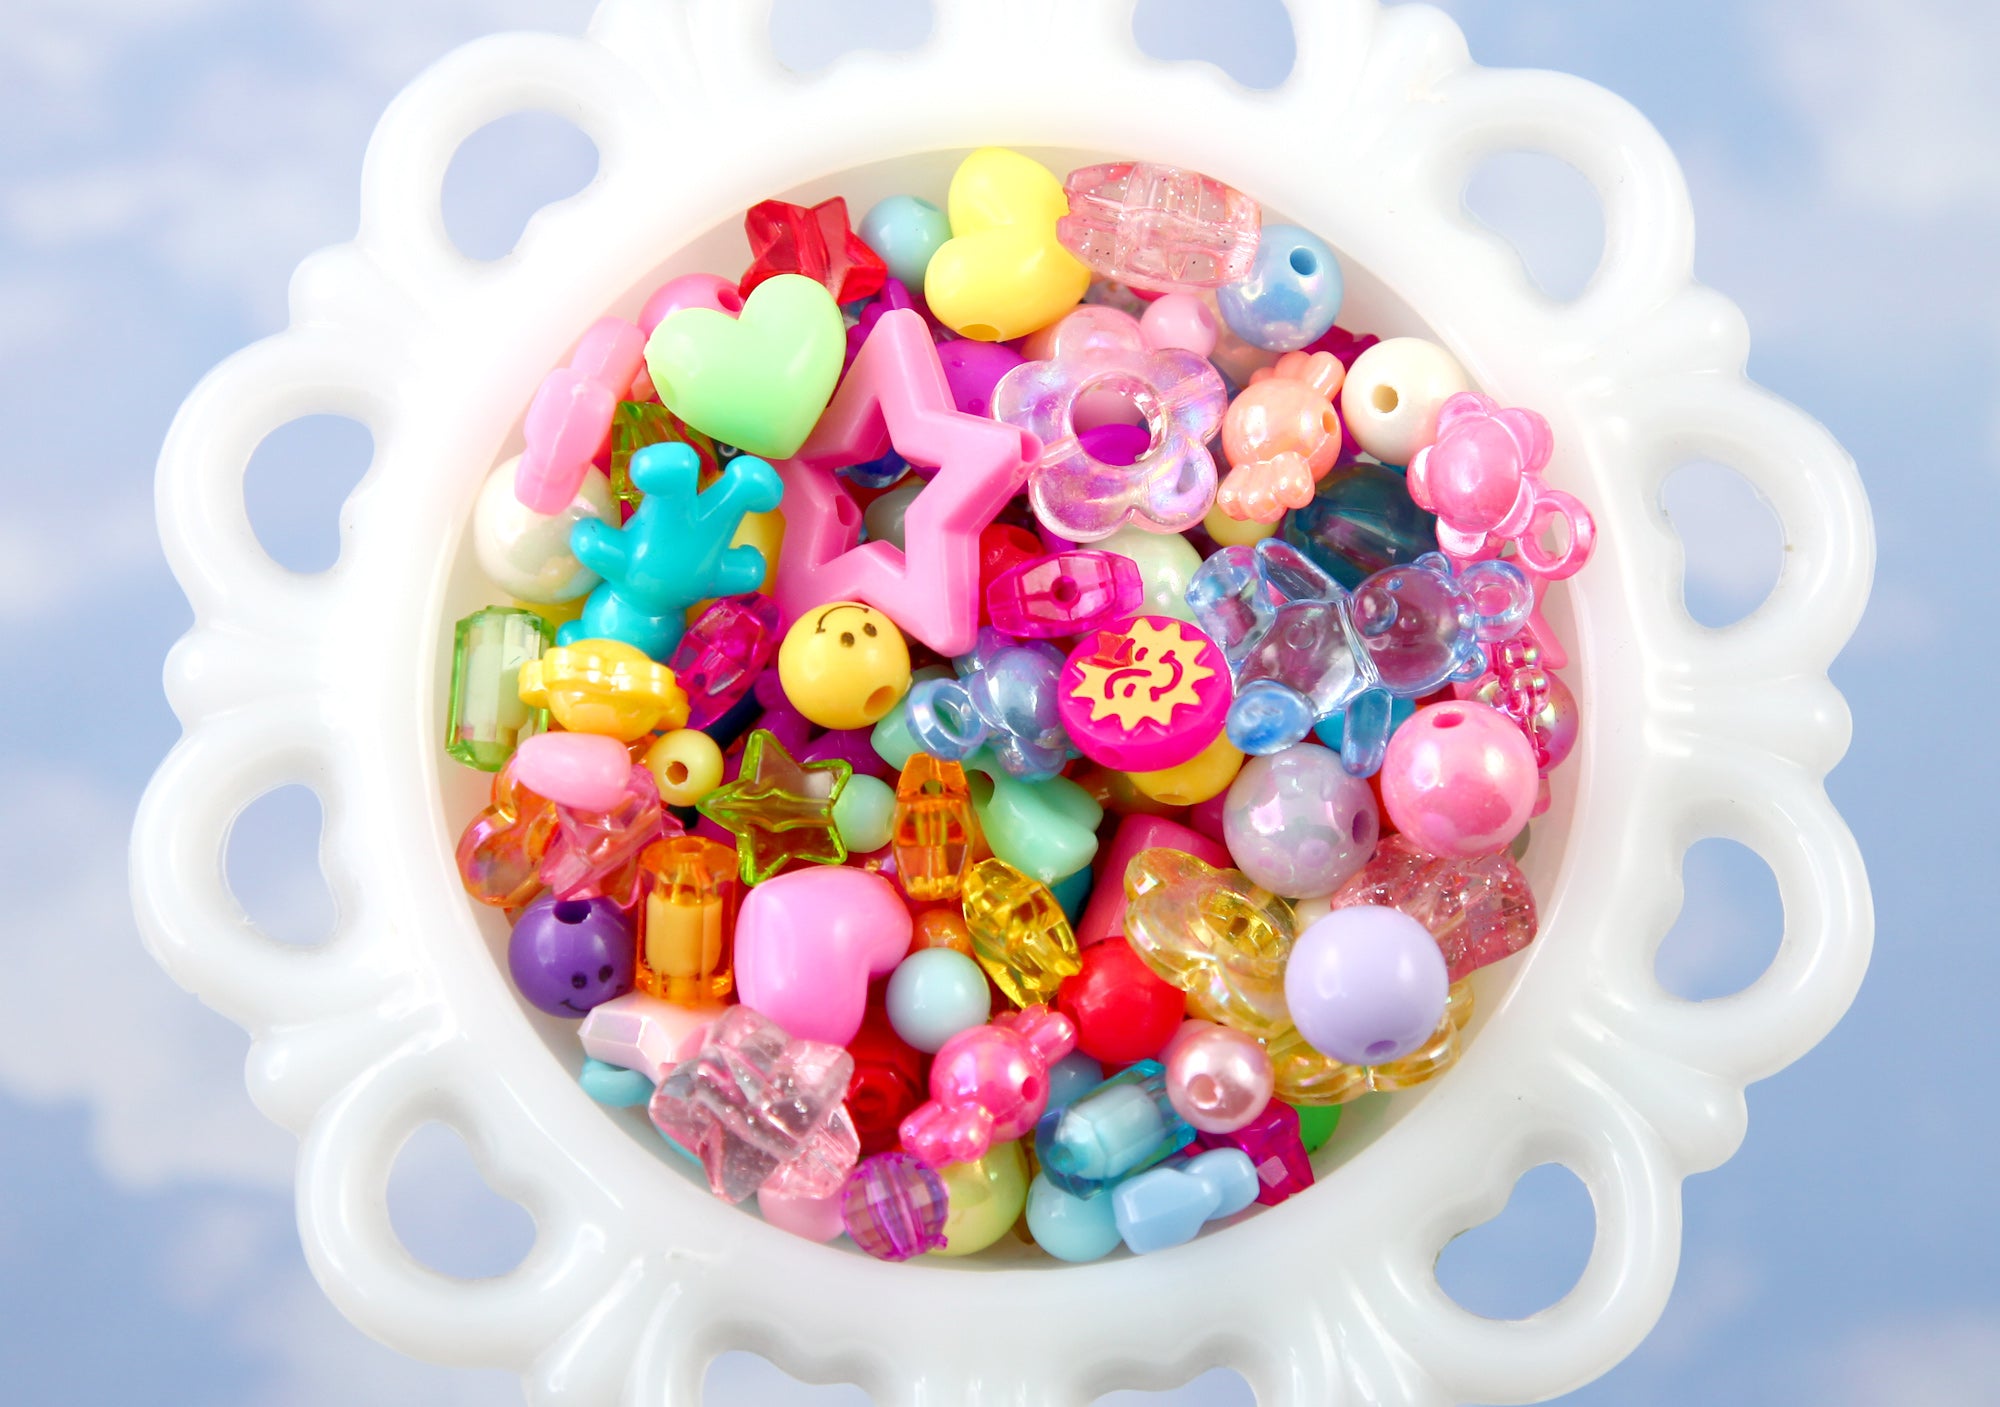 25 10mm Cupcake, Popsicle, Ice Cream and Candy Beads - Mixed Sweet Treat Clay Beads by Smileyboy Beads | Michaels